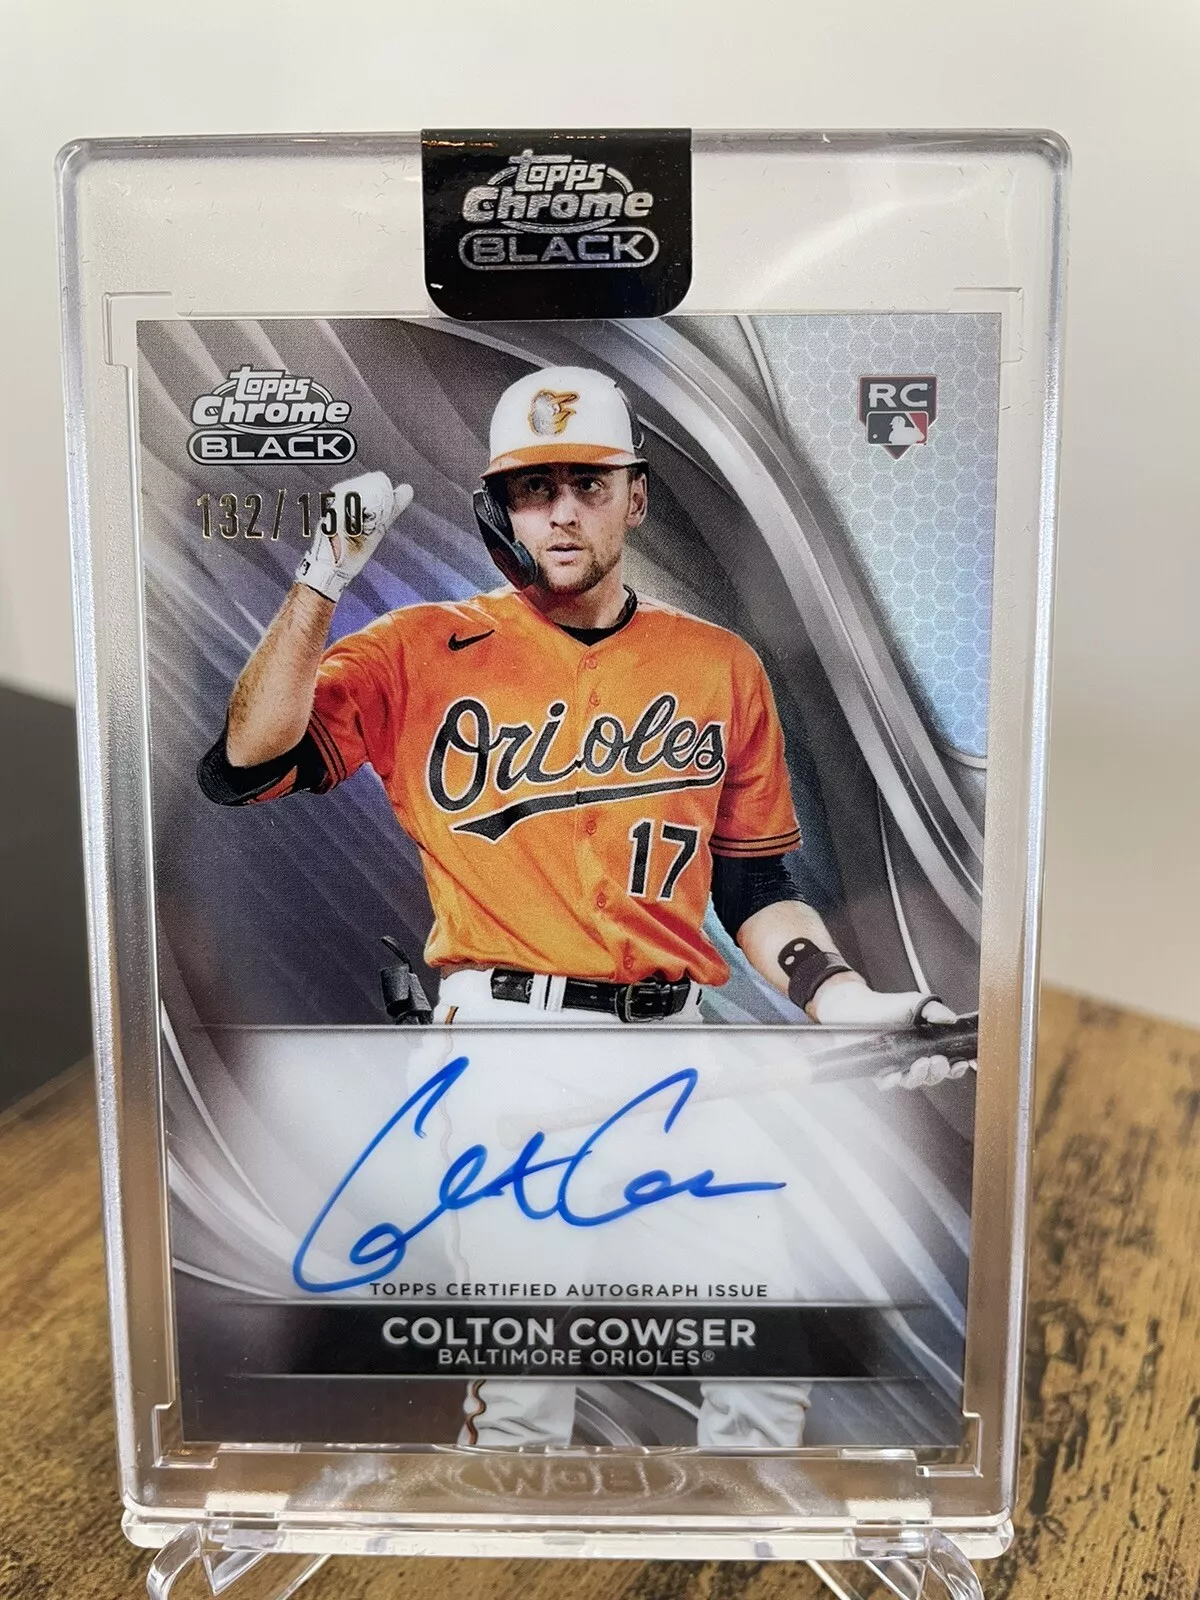 2024 Topps Chrome Black Colton Cowser Rookie Refractor Auto #/150 🔥